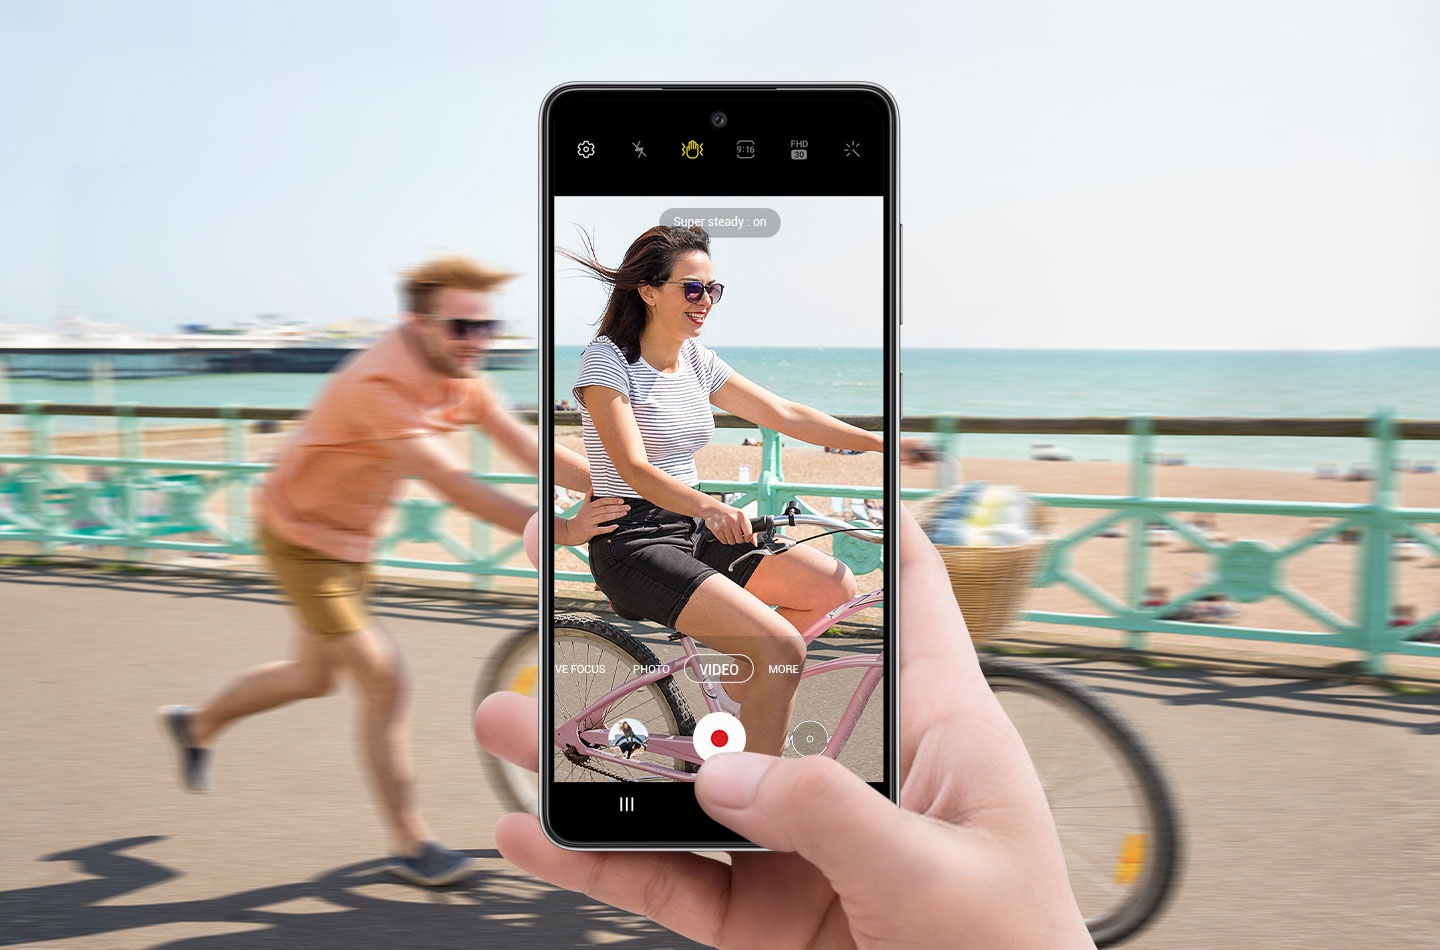 A person on a bike with another person running behind them and pushing. In front of this is a hand holding Galaxy A52 5G with the camera interface onscreen. The scene in the display is clearer than the scene outside of the display, depicting how Super Steady allows video to be captured smoothly even if the subject is in motion.